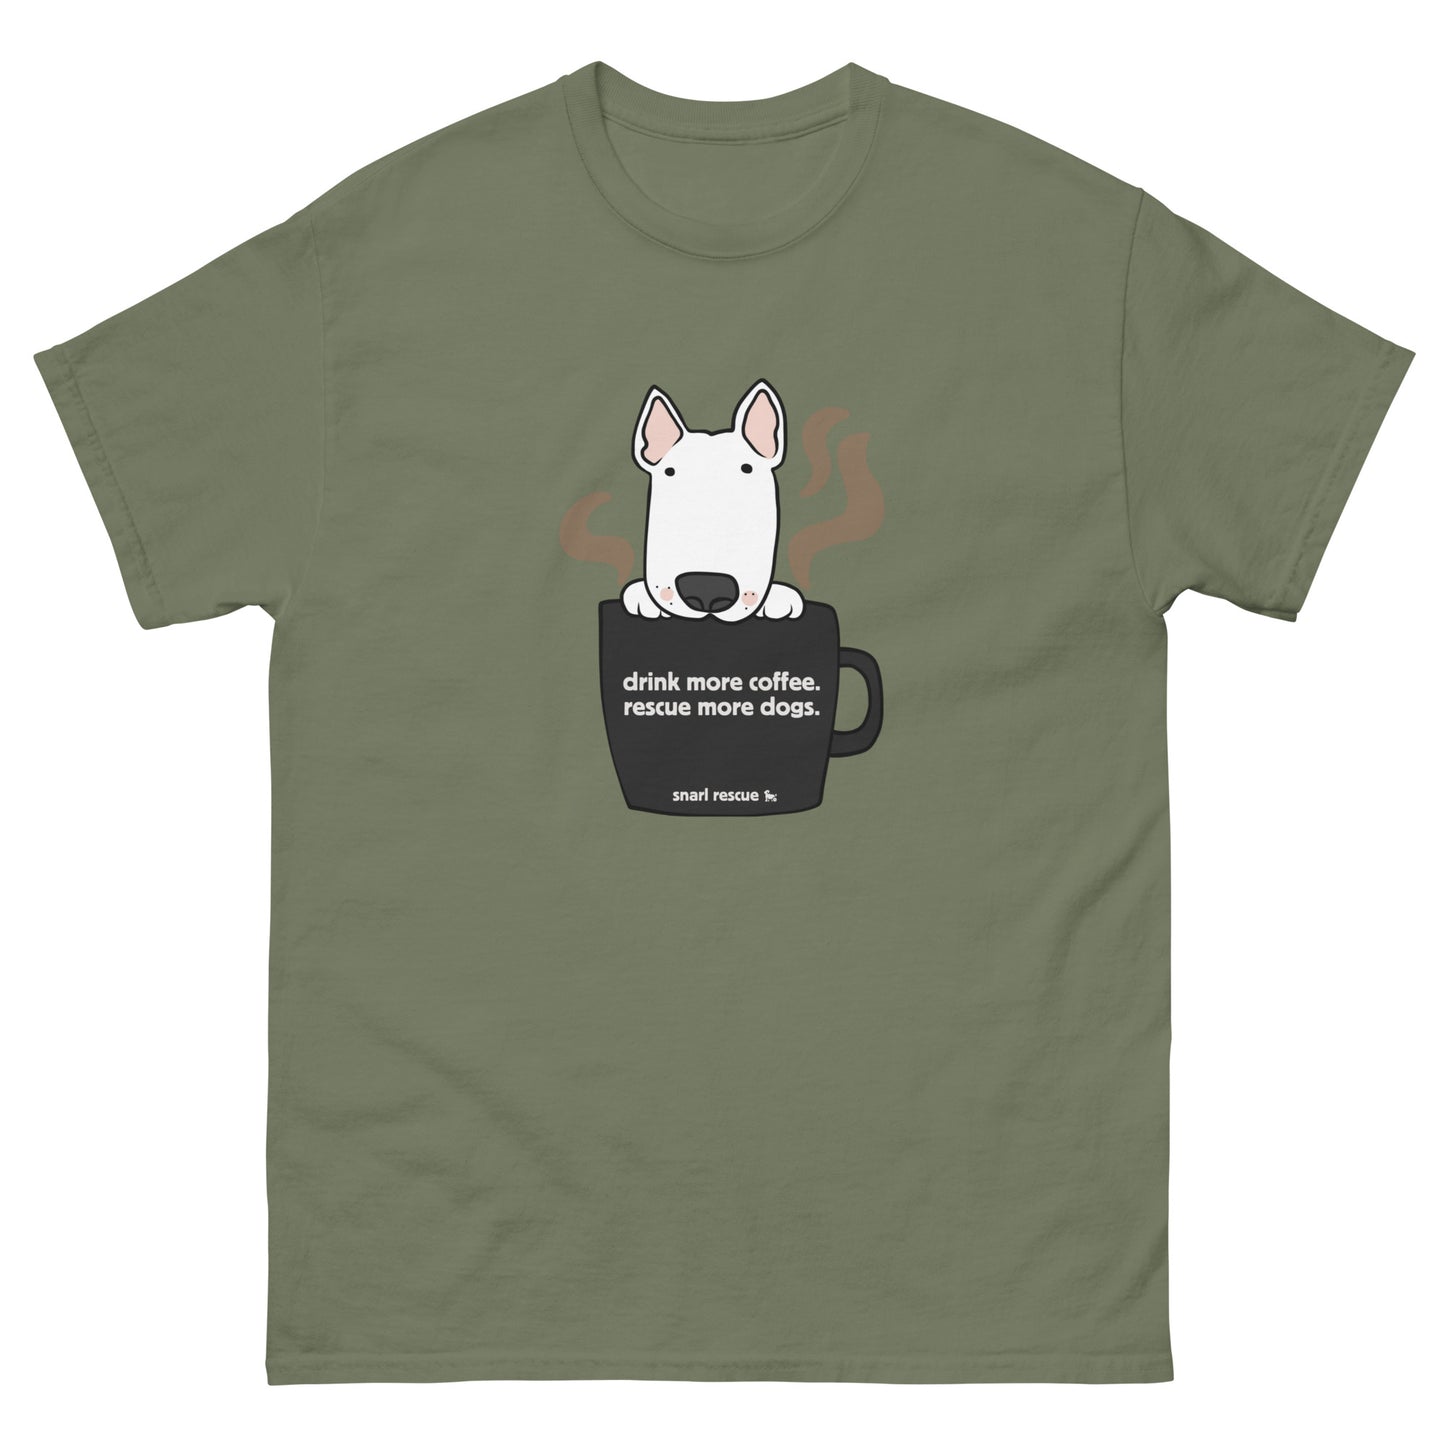 The Large Pup Cup Tee